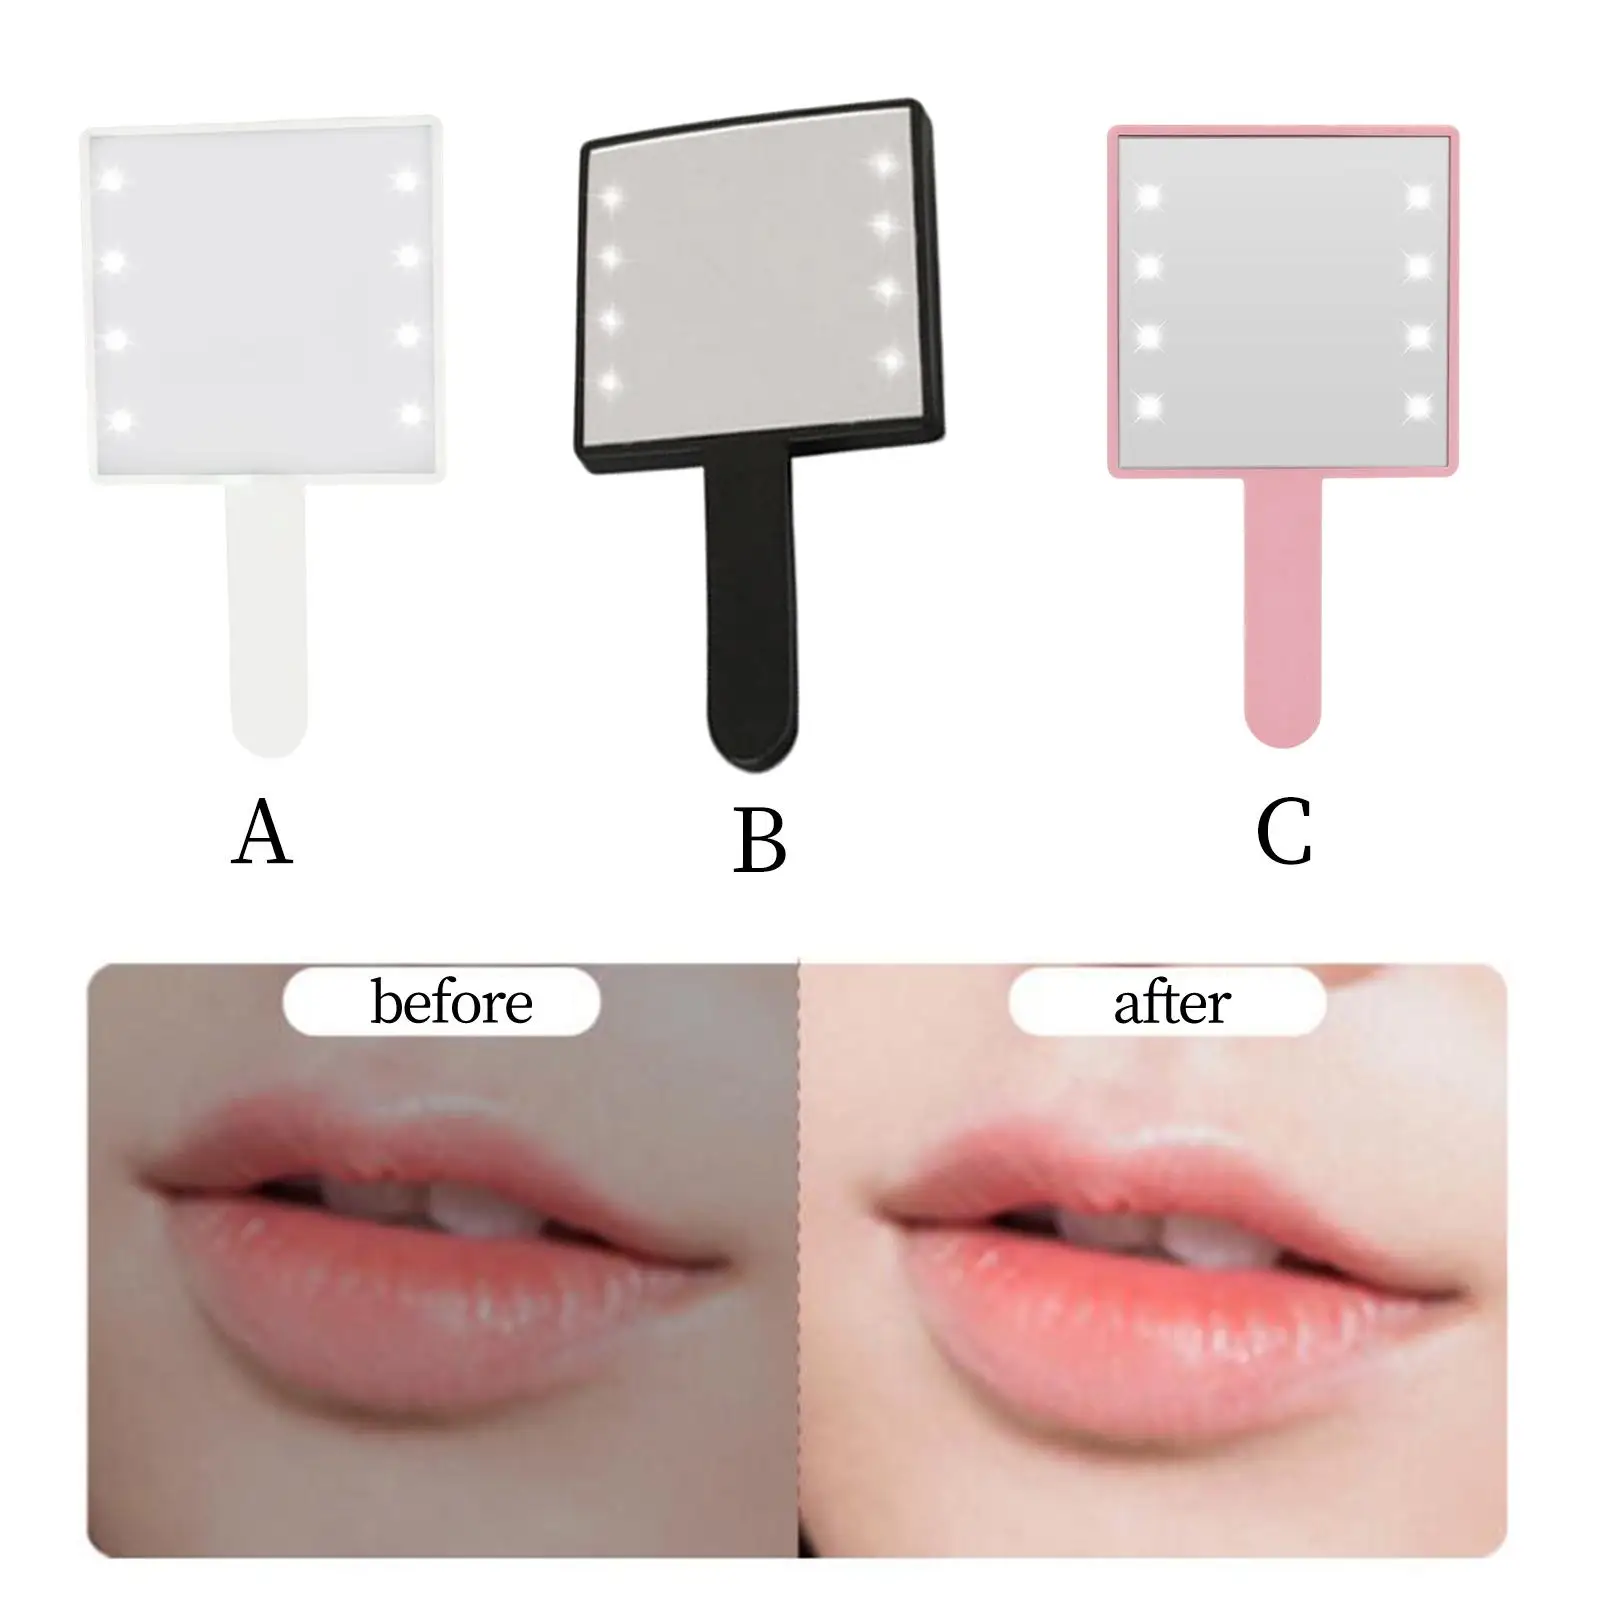 Makeup  Light, Compact Hand Mirror, Pocket Mirror for Girls Women, Portable Cosmetic Mirror with Handle Small for Travel Salon